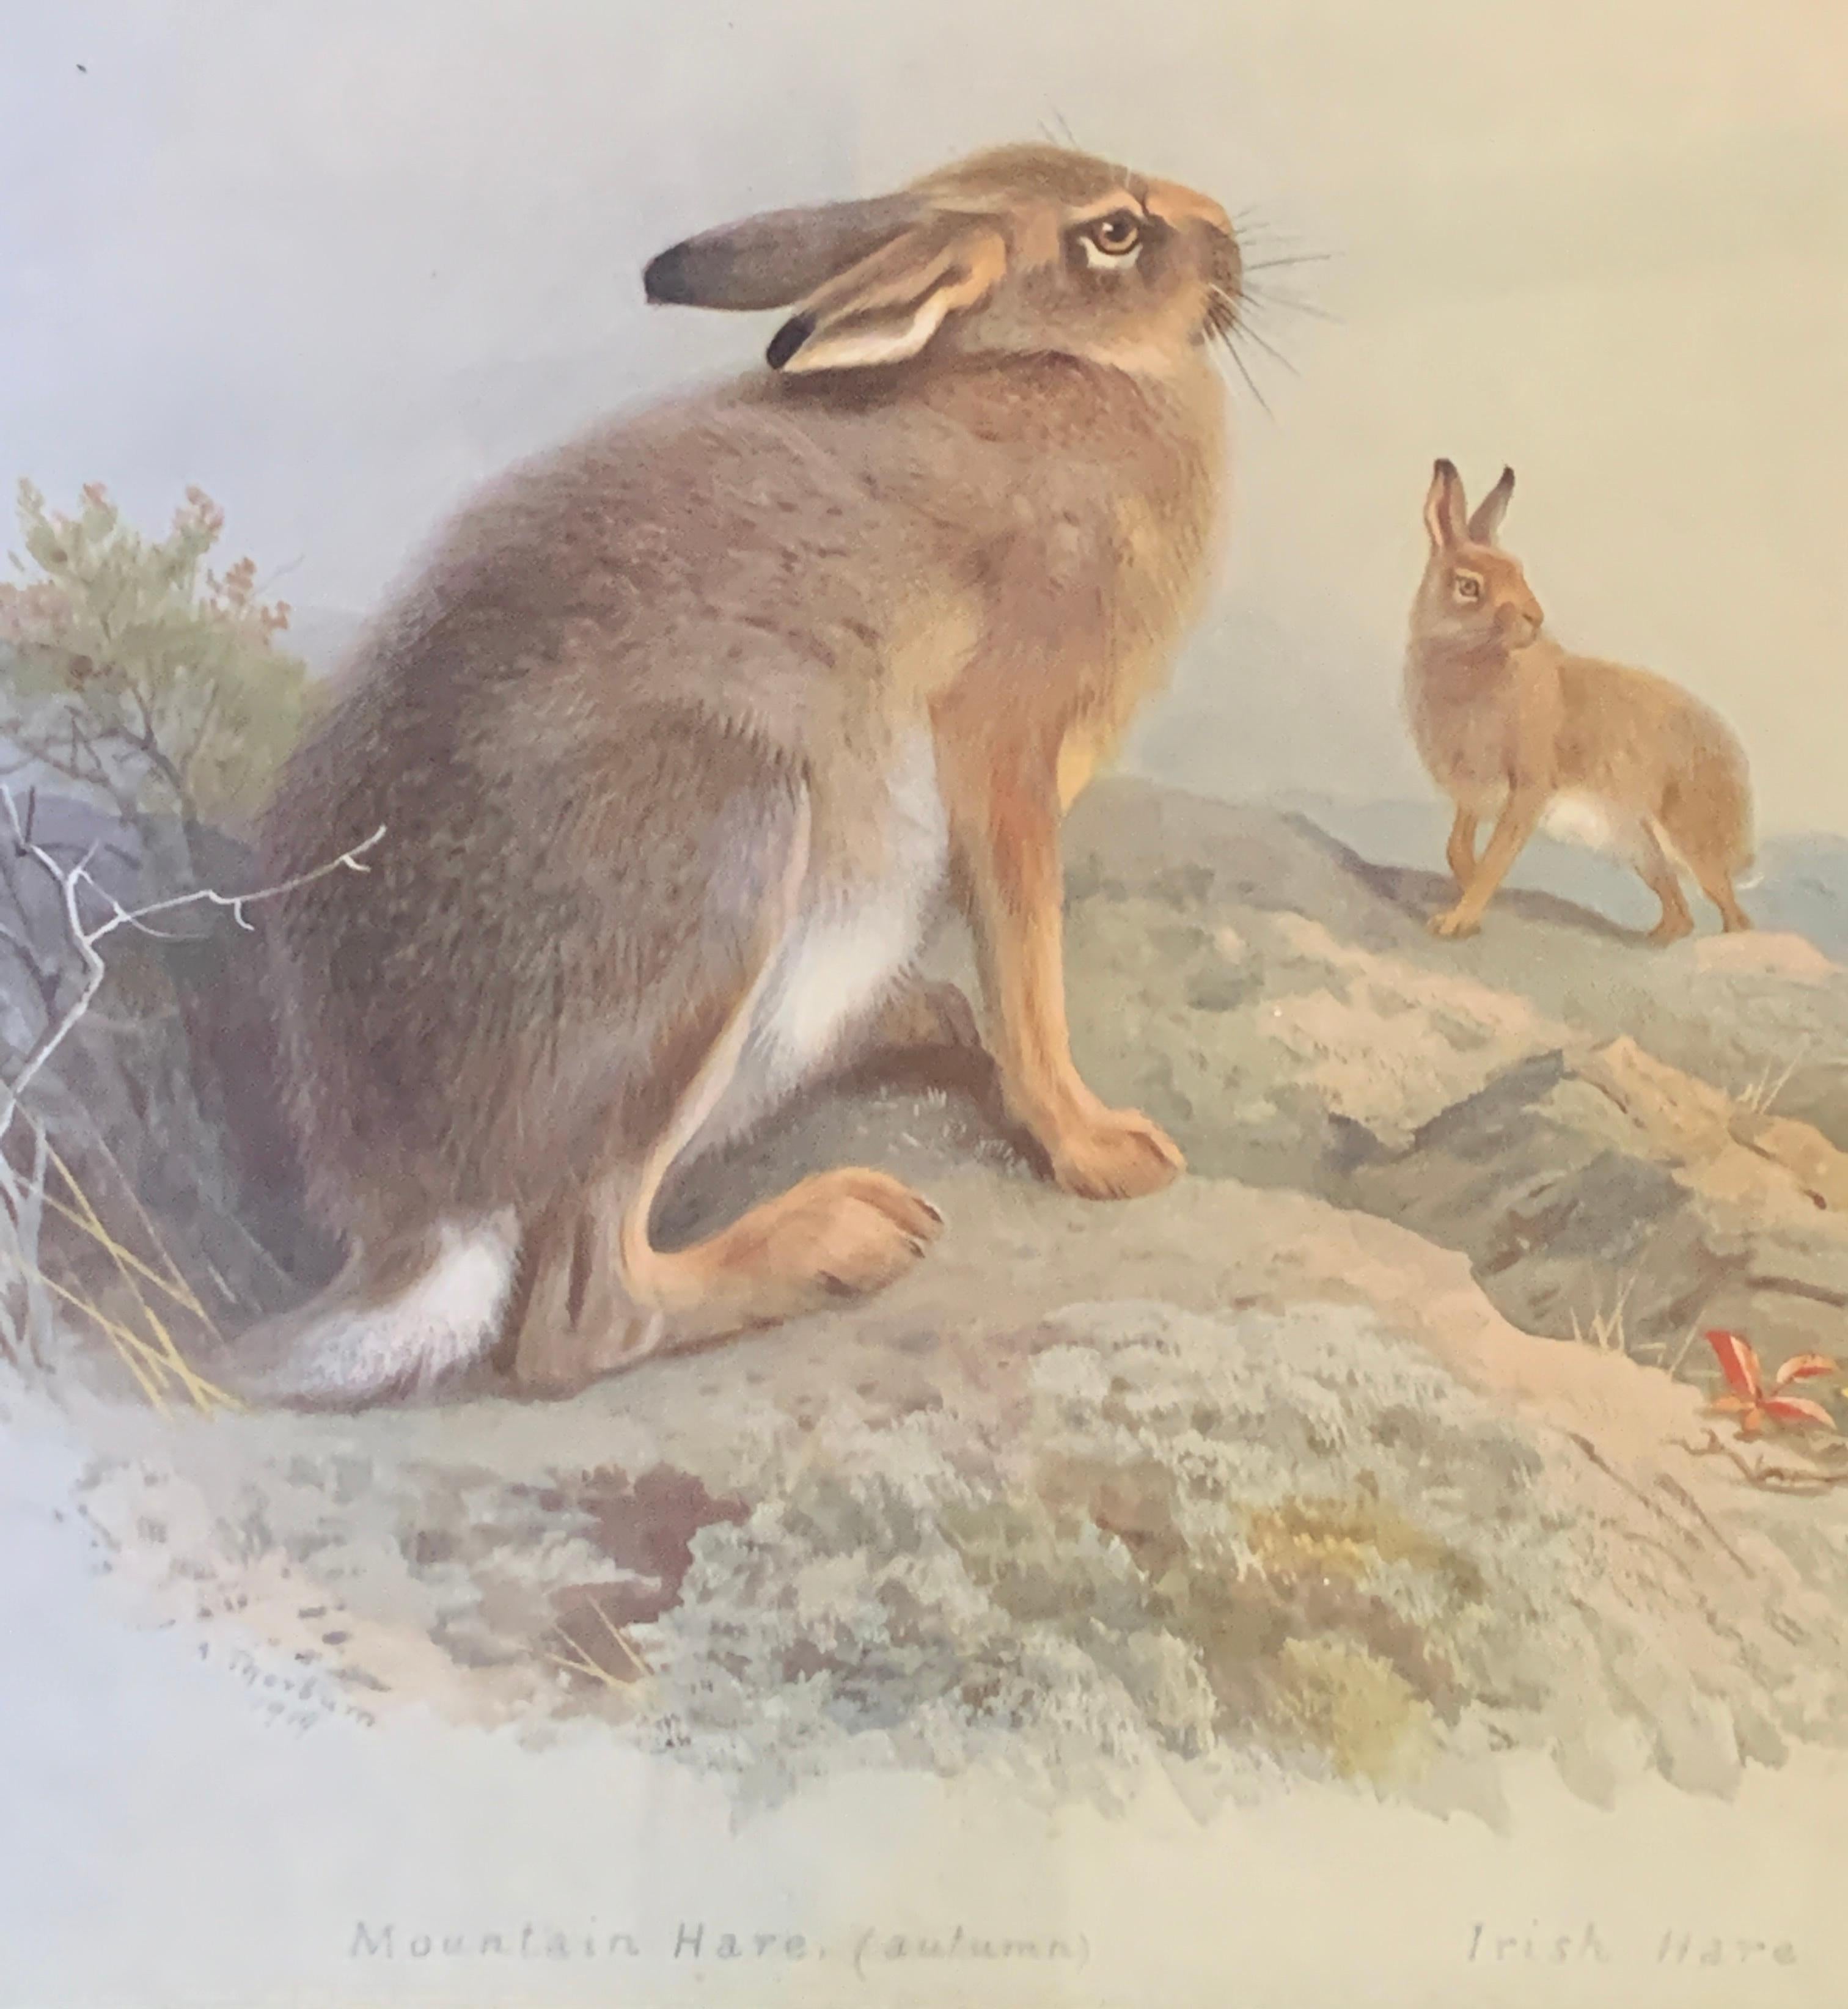 English early 20th century, An Irish Hare and a Mountain hare in a landscape  - Print by Archibald Thorburn